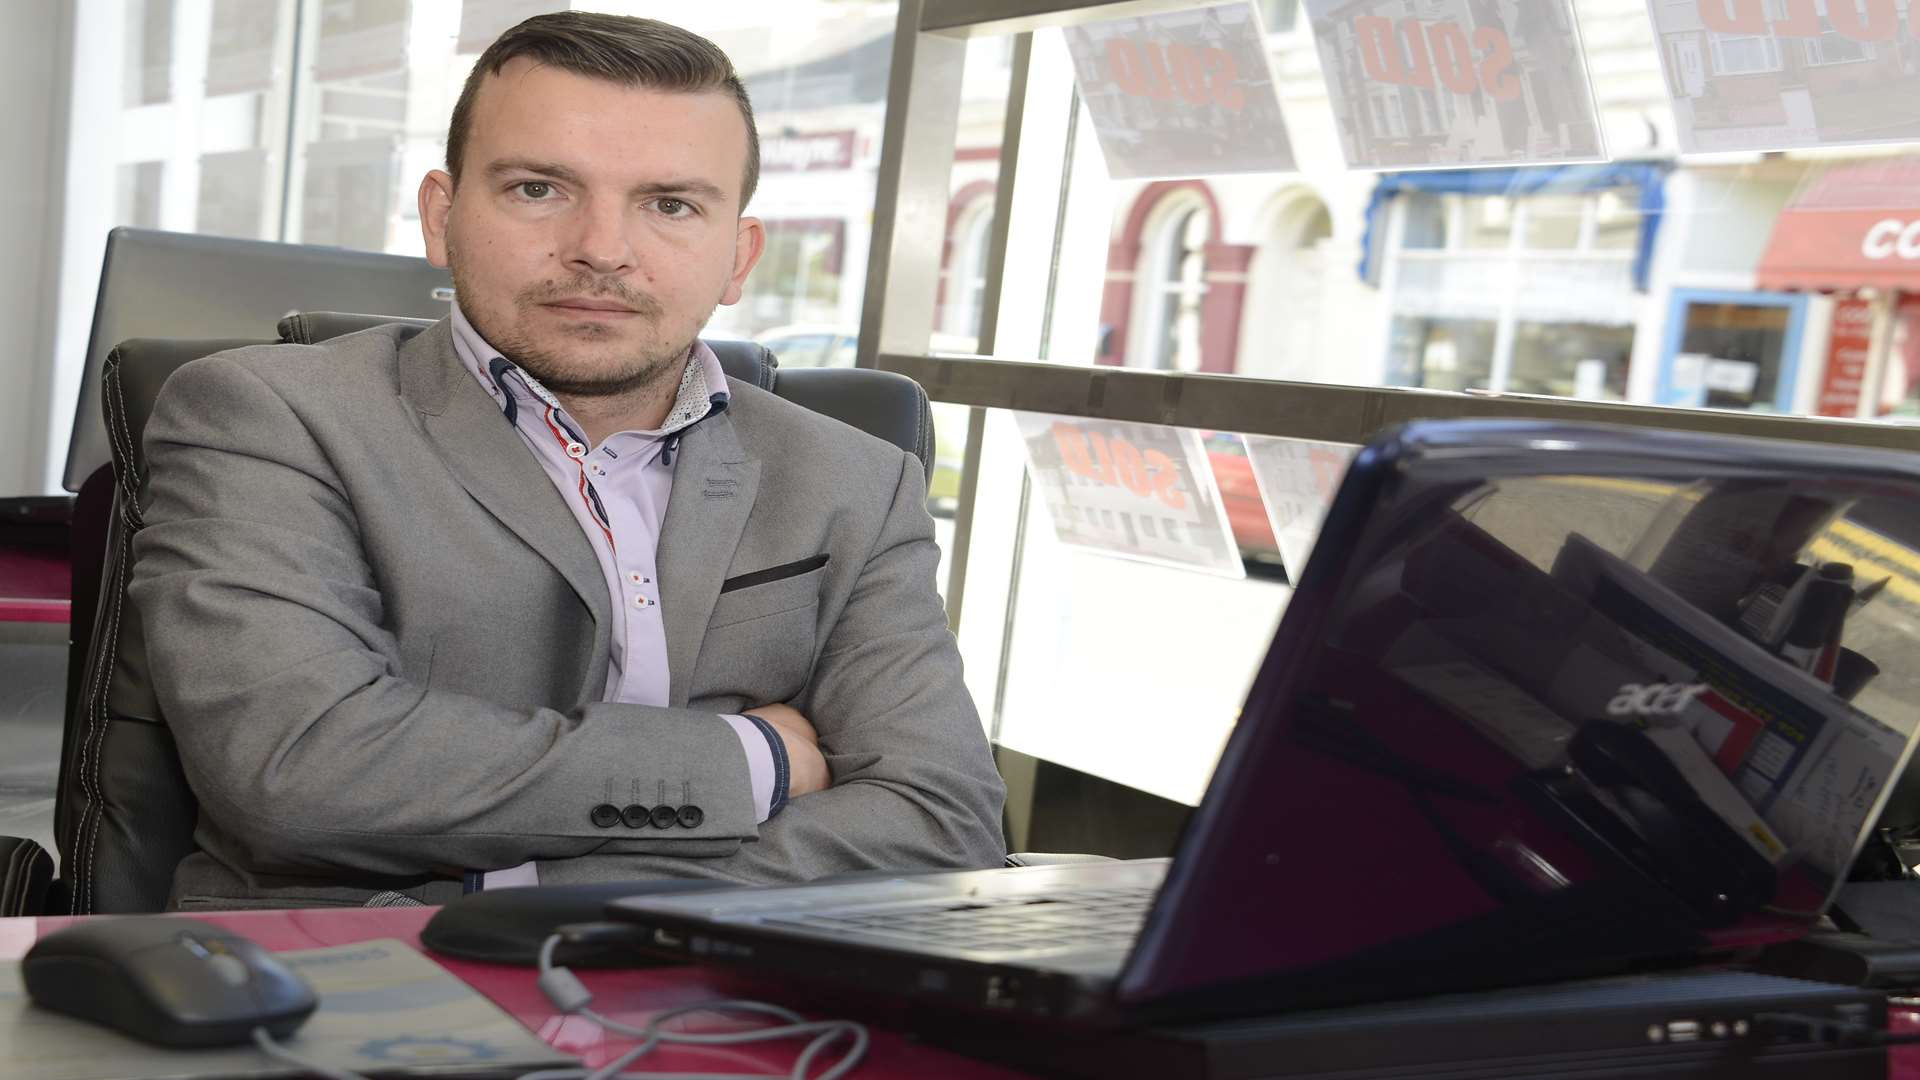 Estate agent Daniel Wells at the desk where he was attacked by Fergus Wilson